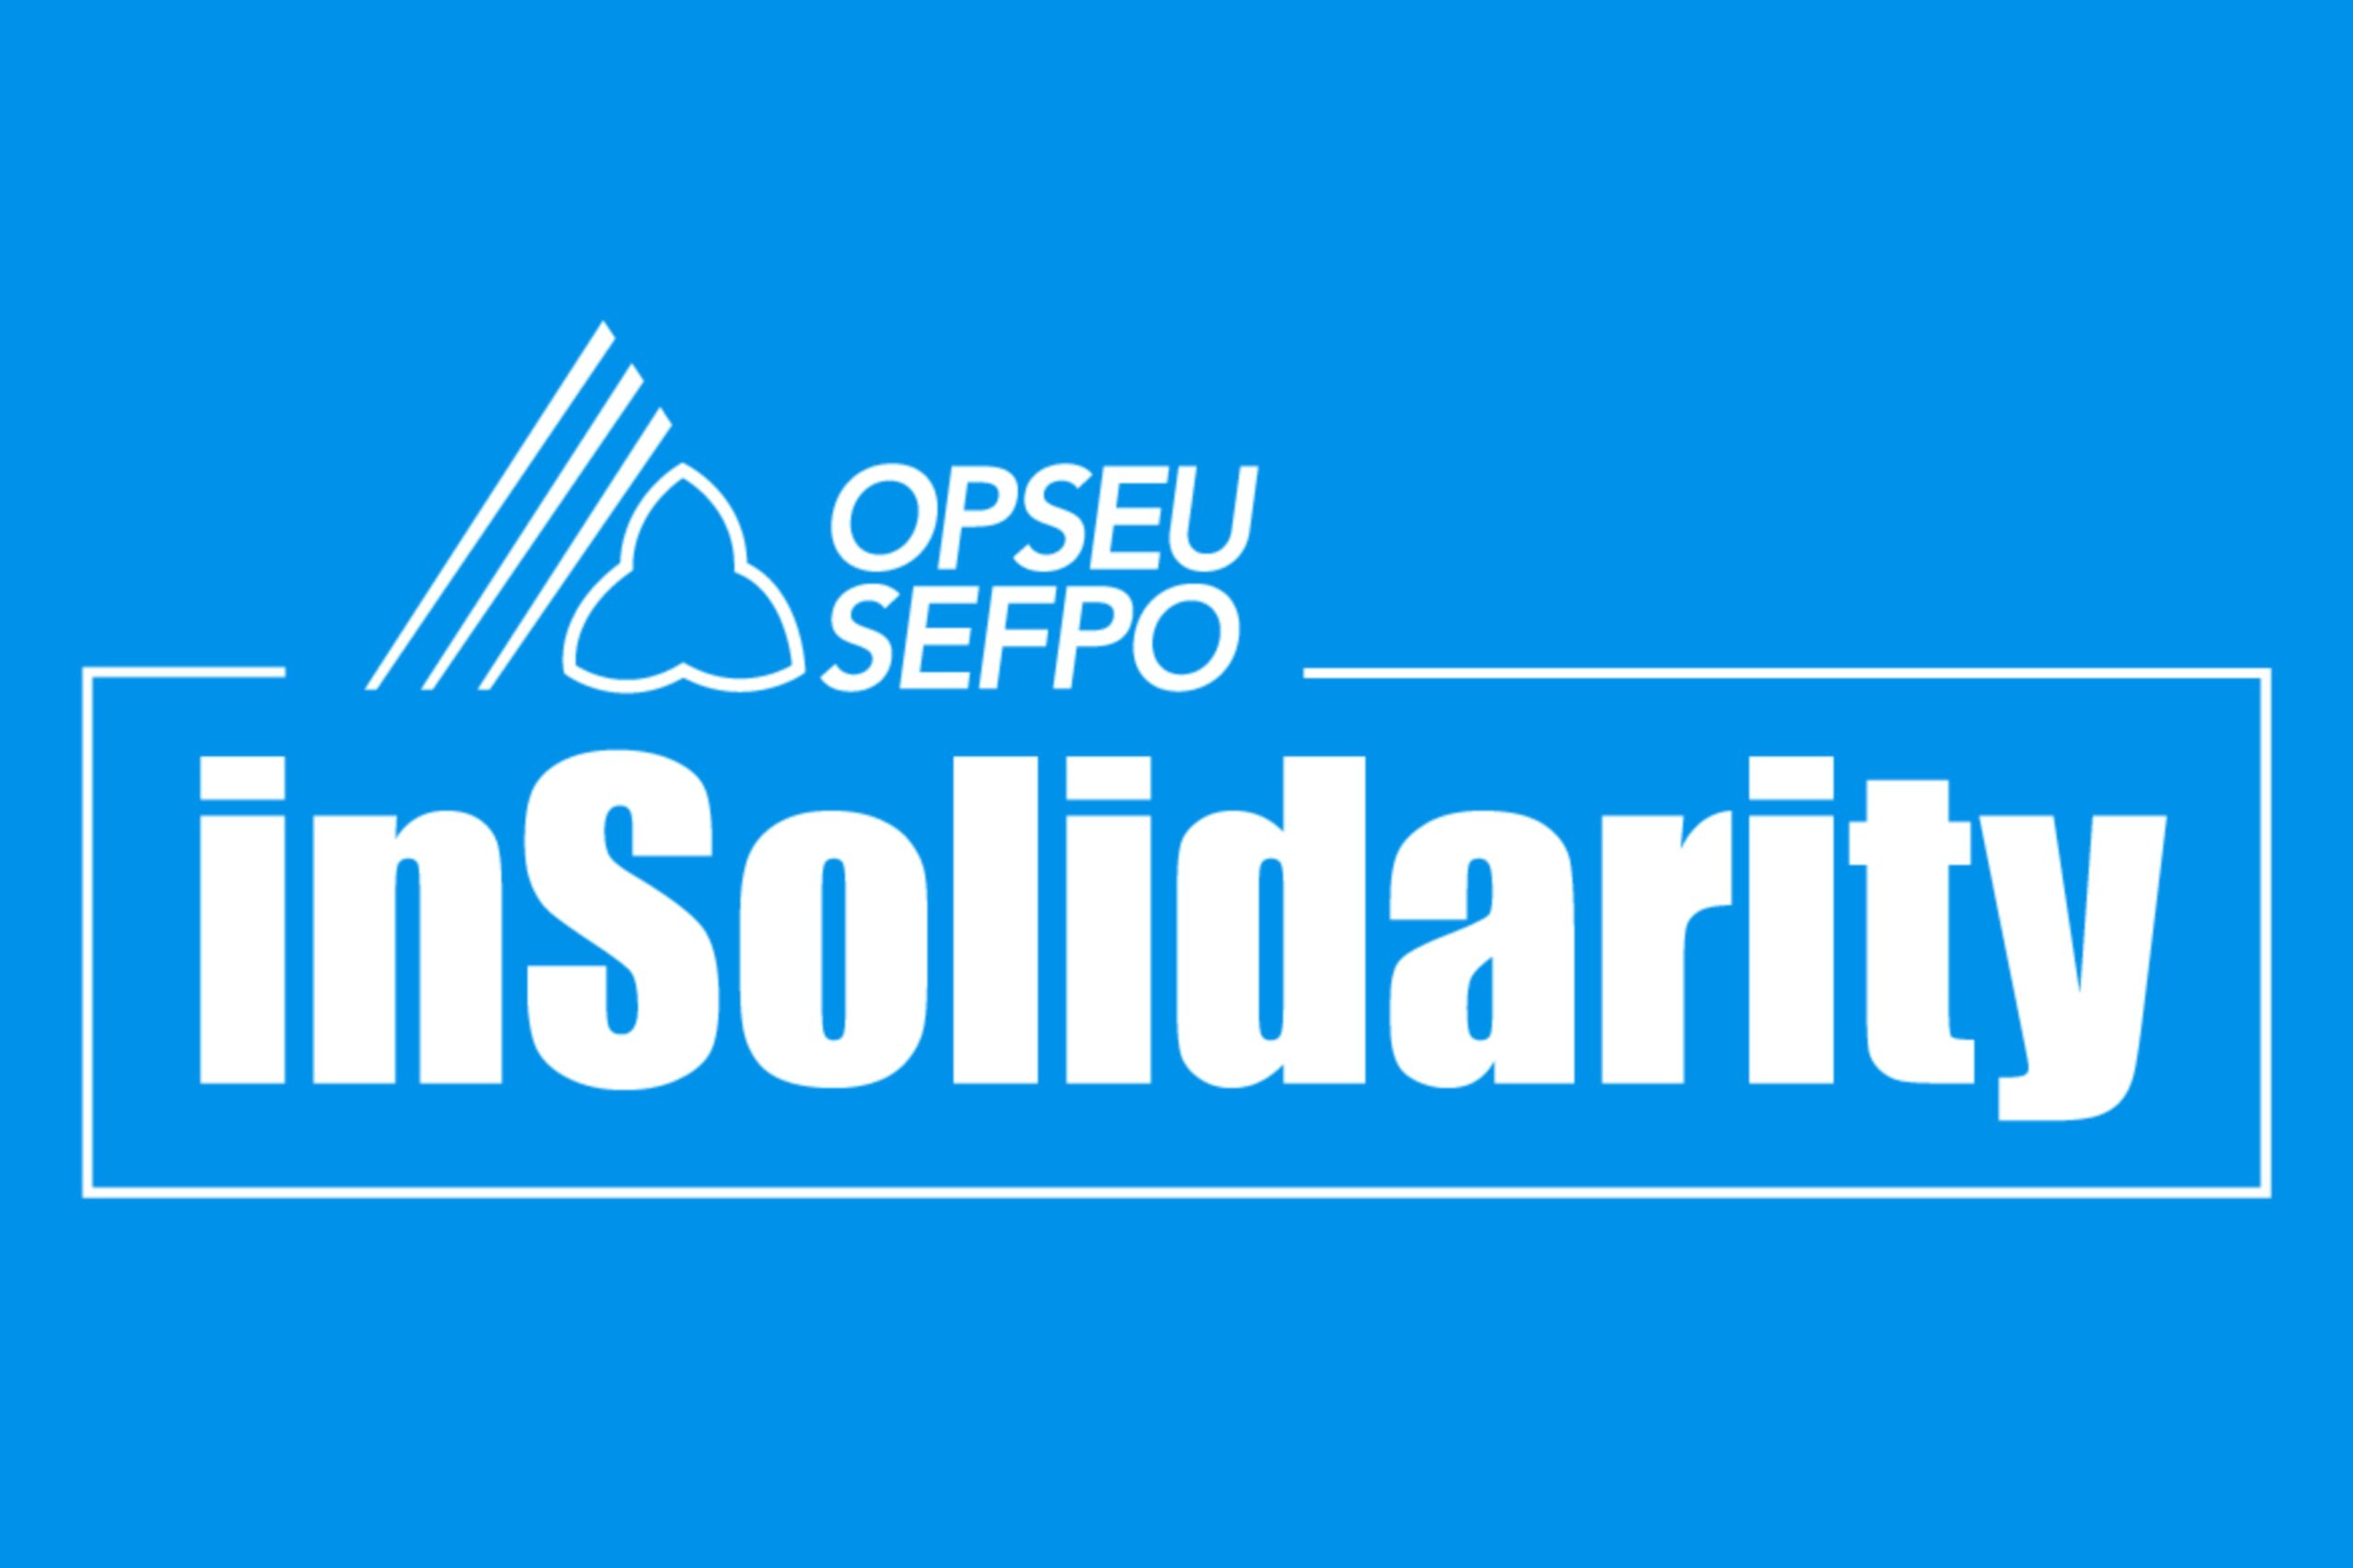 OPSEU/SEFPO inSolidarity logo in white on blue background